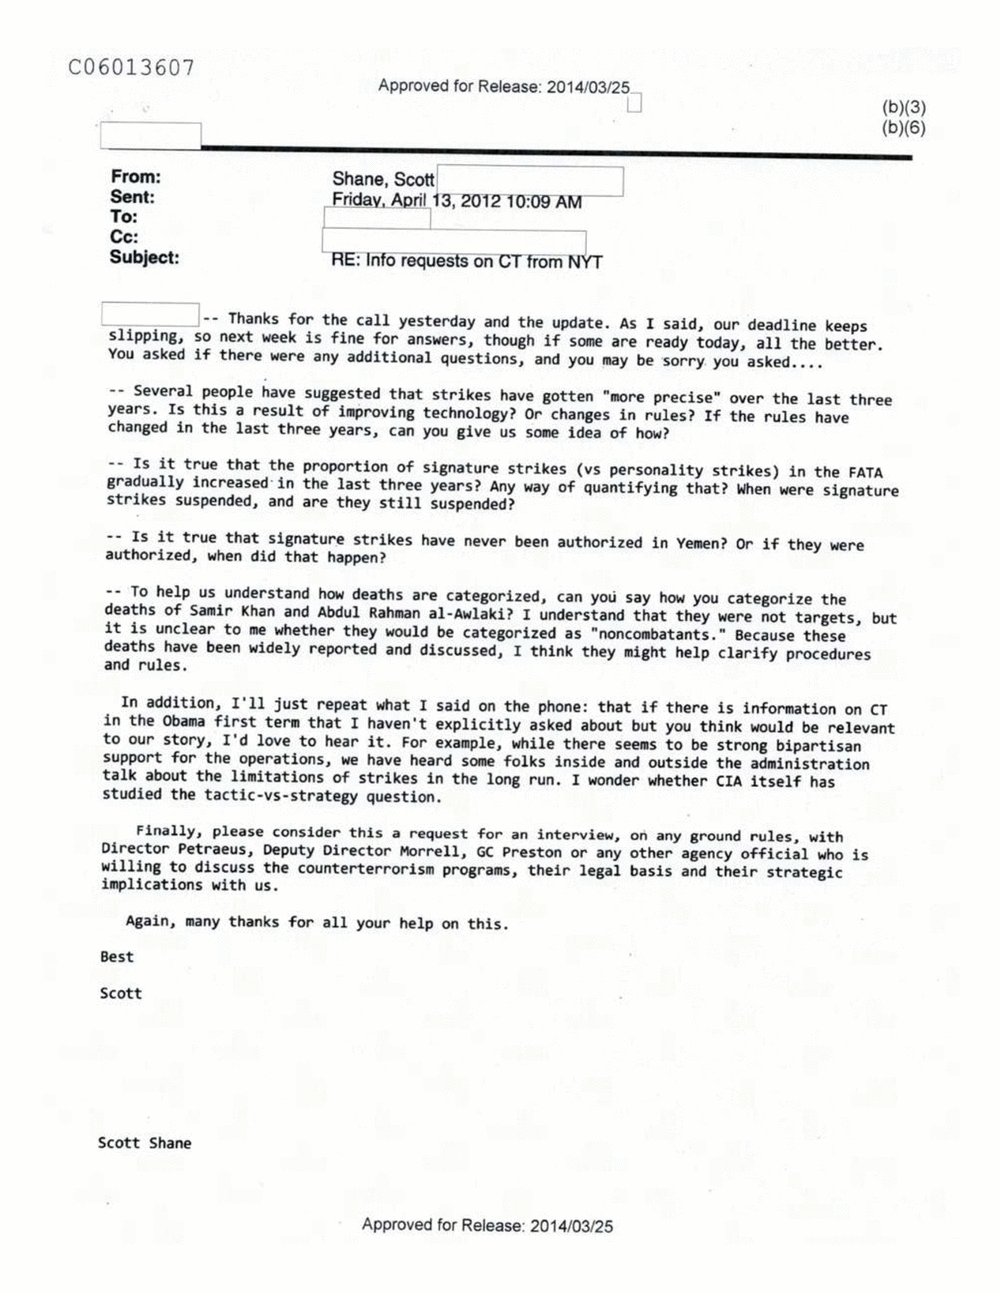 Page 416 from Email Correspondence Between Reporters and CIA Flacks